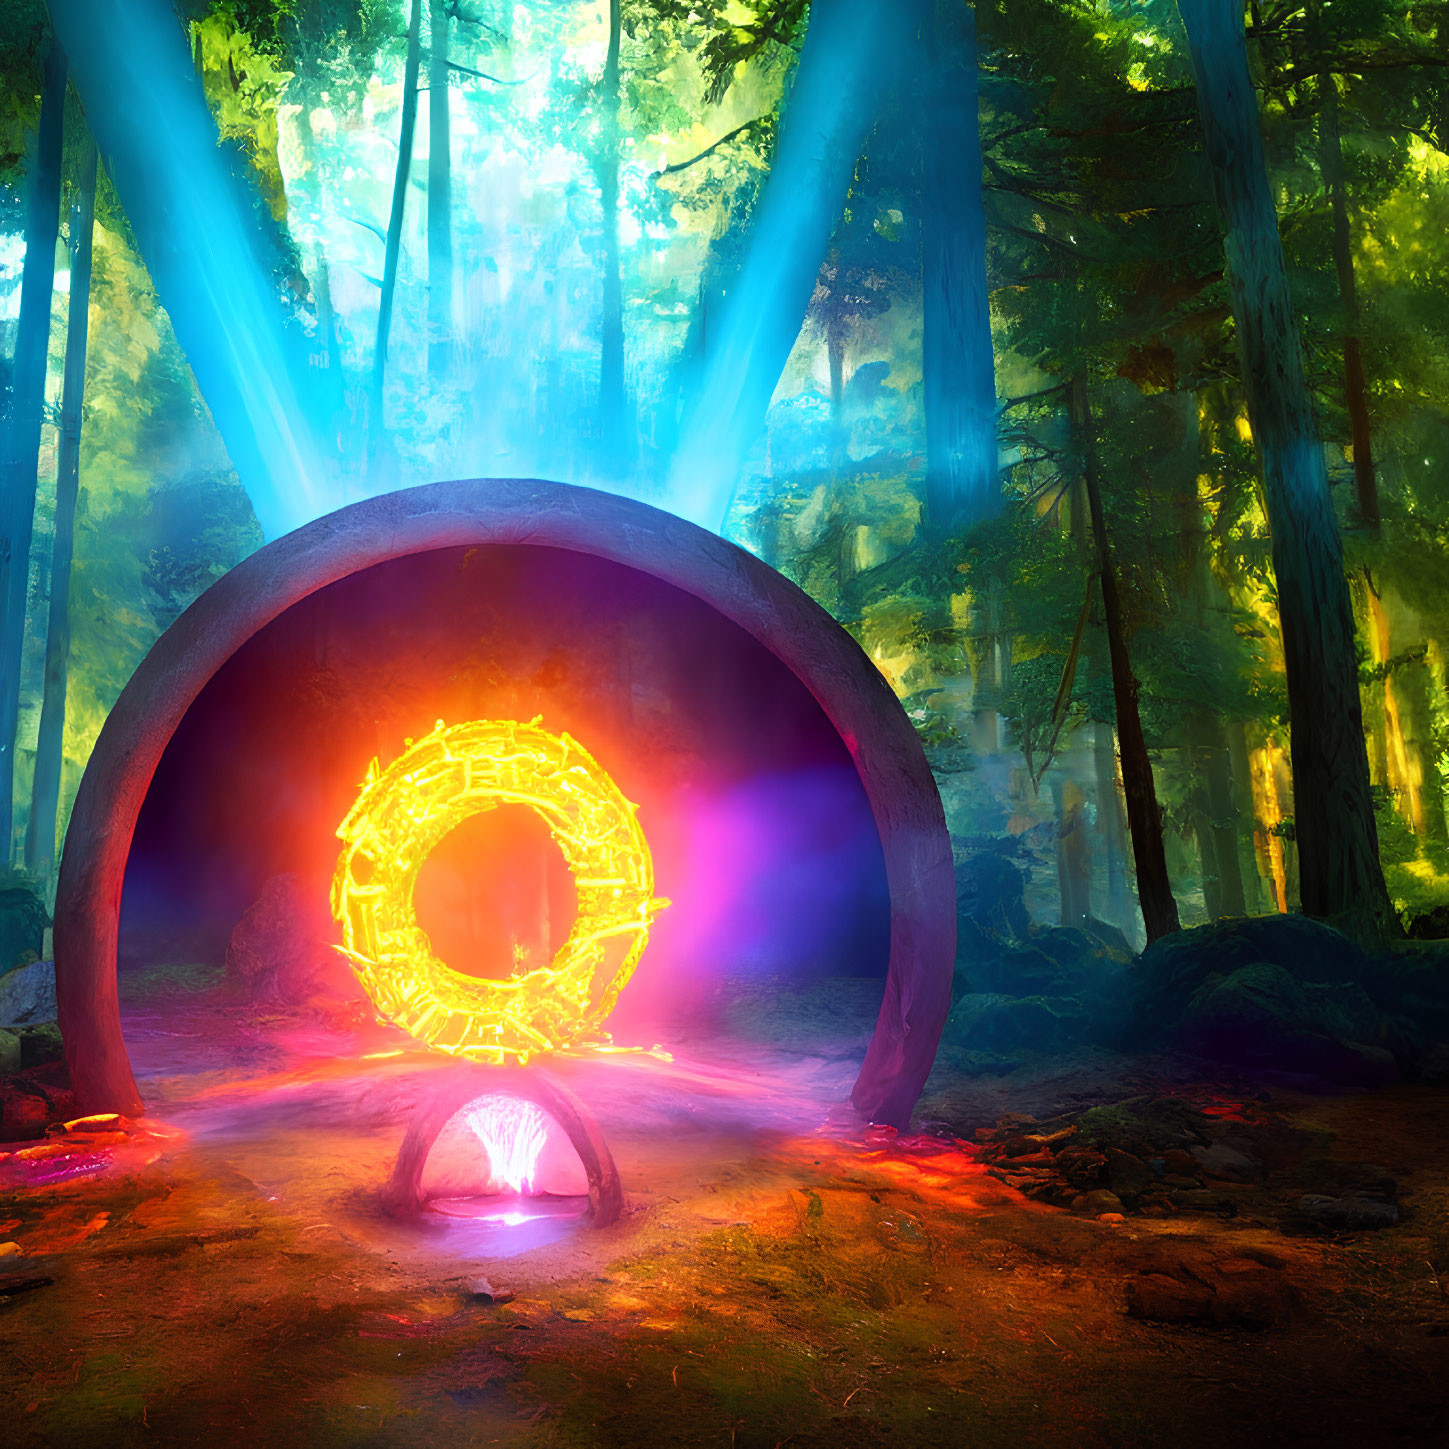 Mystic portal with glowing runes in sunlit forest clearing